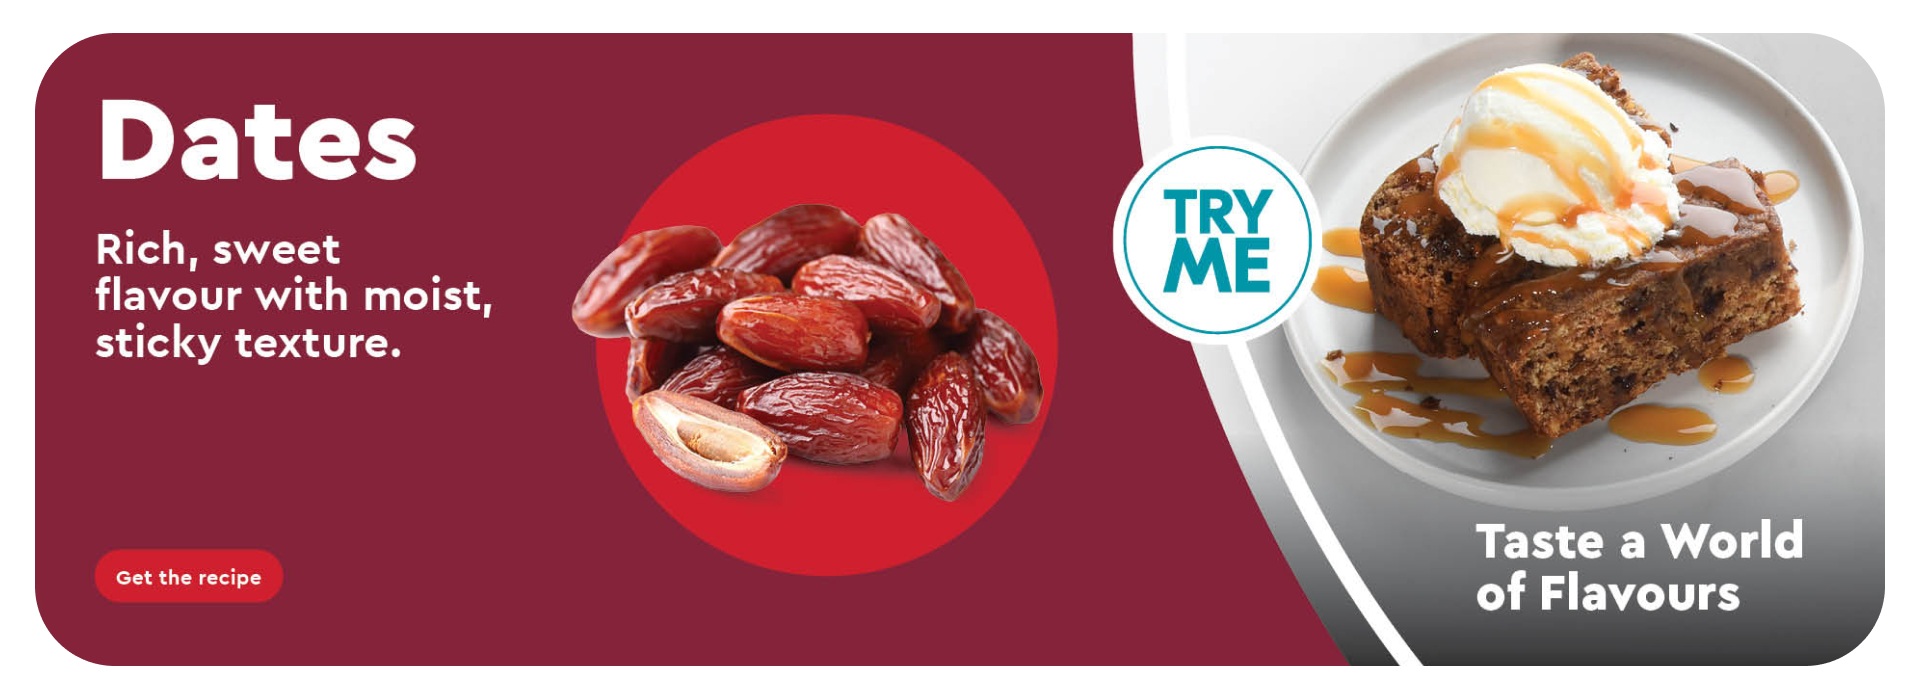 Dates, Rich sweet flavour with moist, sticky texture. Taste a world of flavours. Get the Recipe.